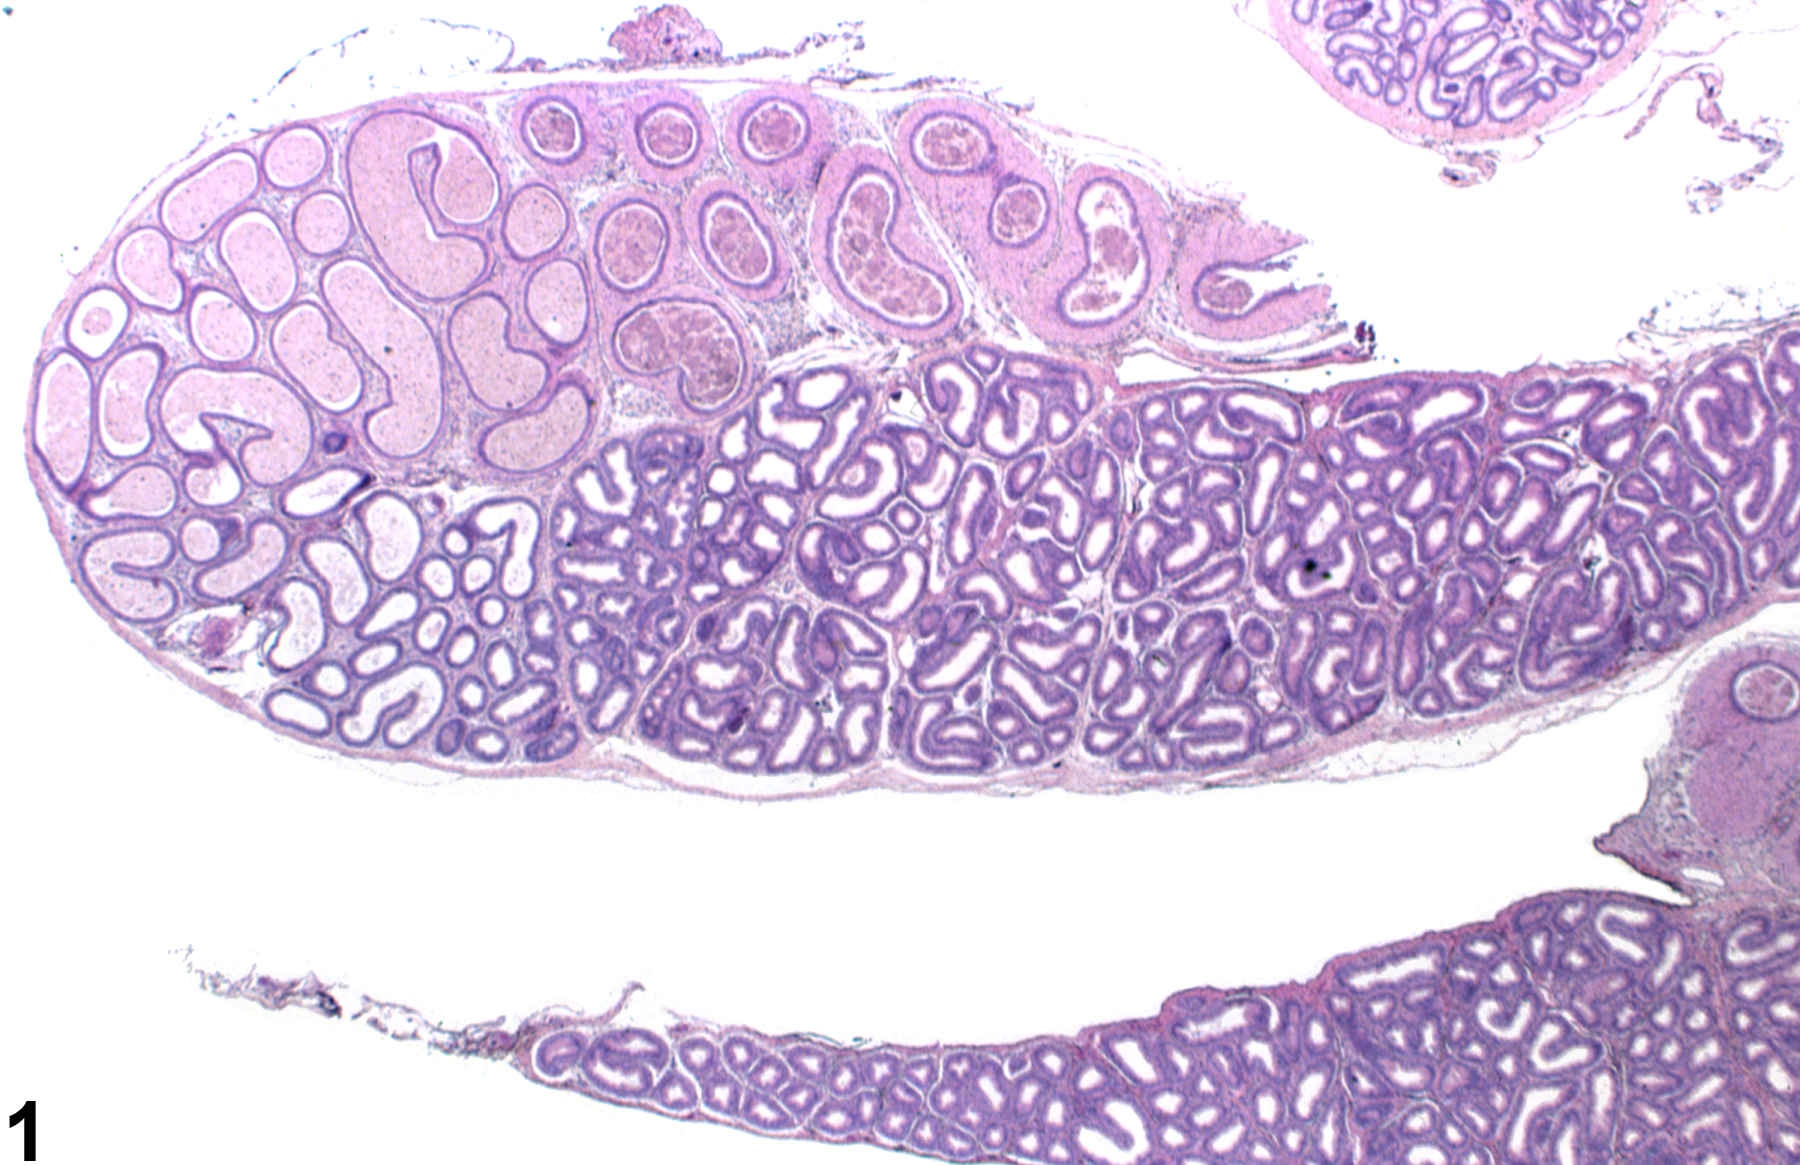 Image of duct atrophy in the epididymis from a male F344/N rat in a subchronic study